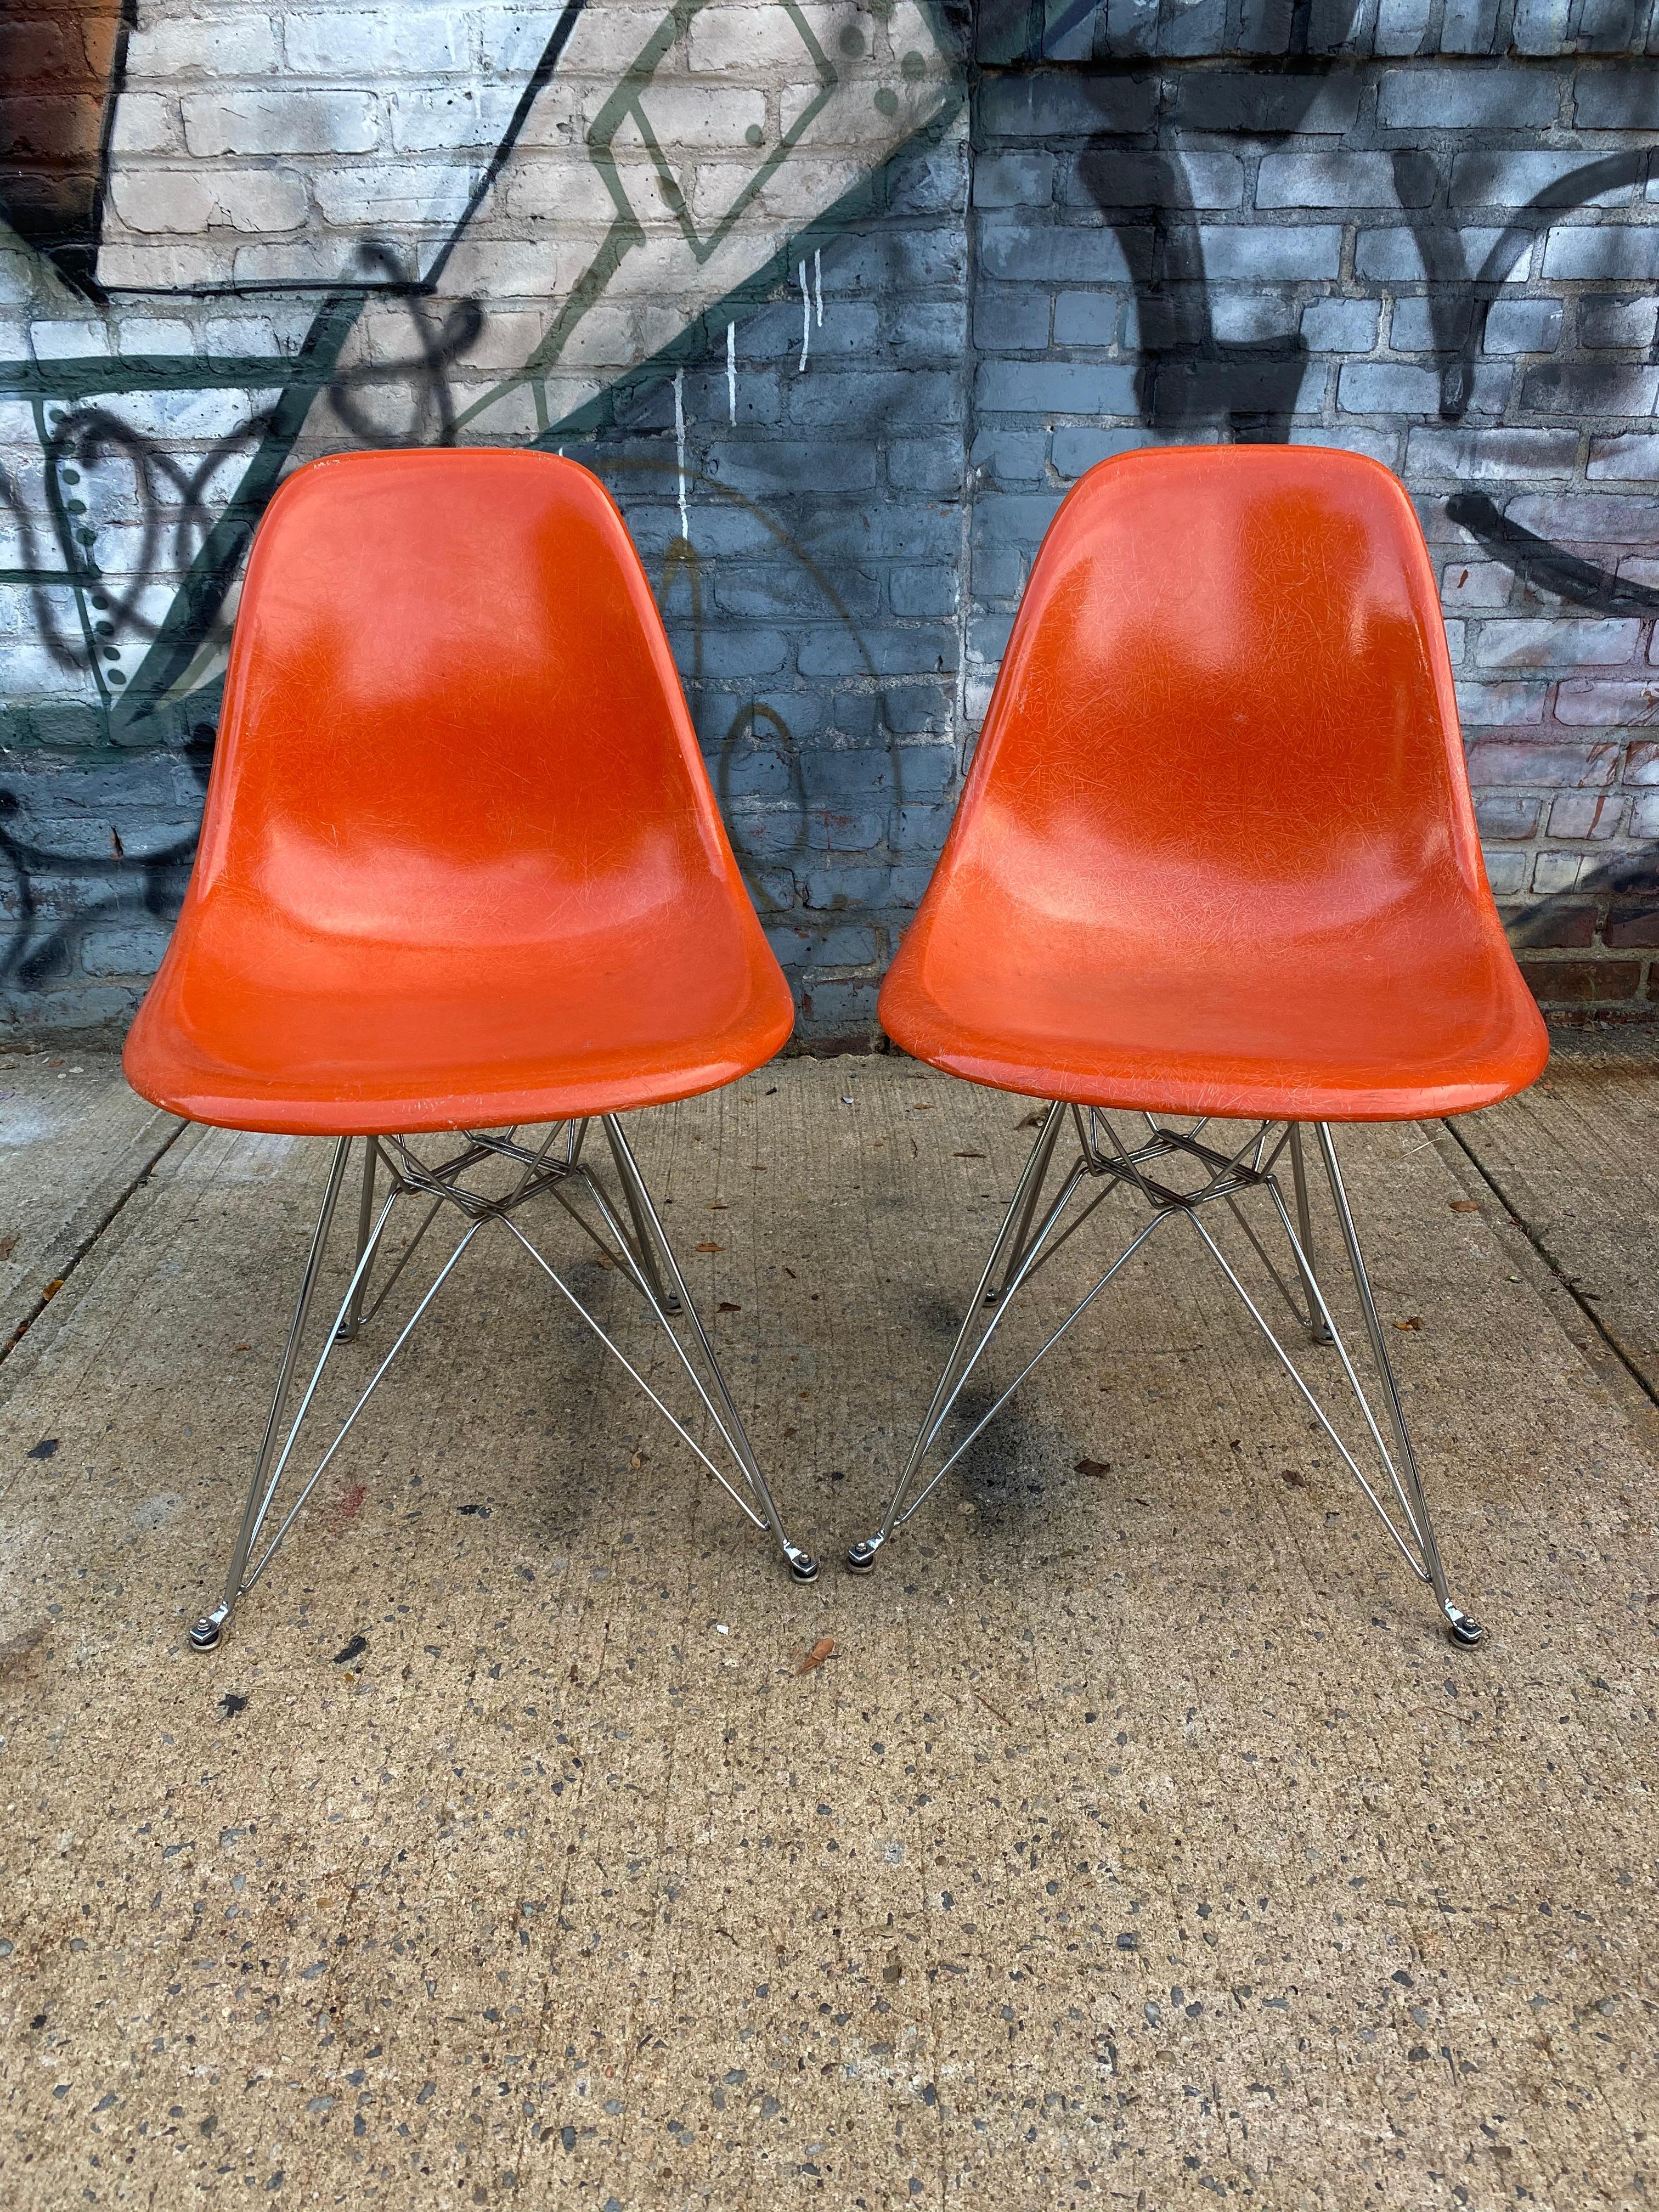 Elegant pair of matching Herman Miller Eames dining chairs. Brilliant red orange vintage fiberglass shells on newer production chrome Eiffel bases. All glides and mounts intact. Real vintage Herman Miller screws.
Shells embossed Herman Miller and